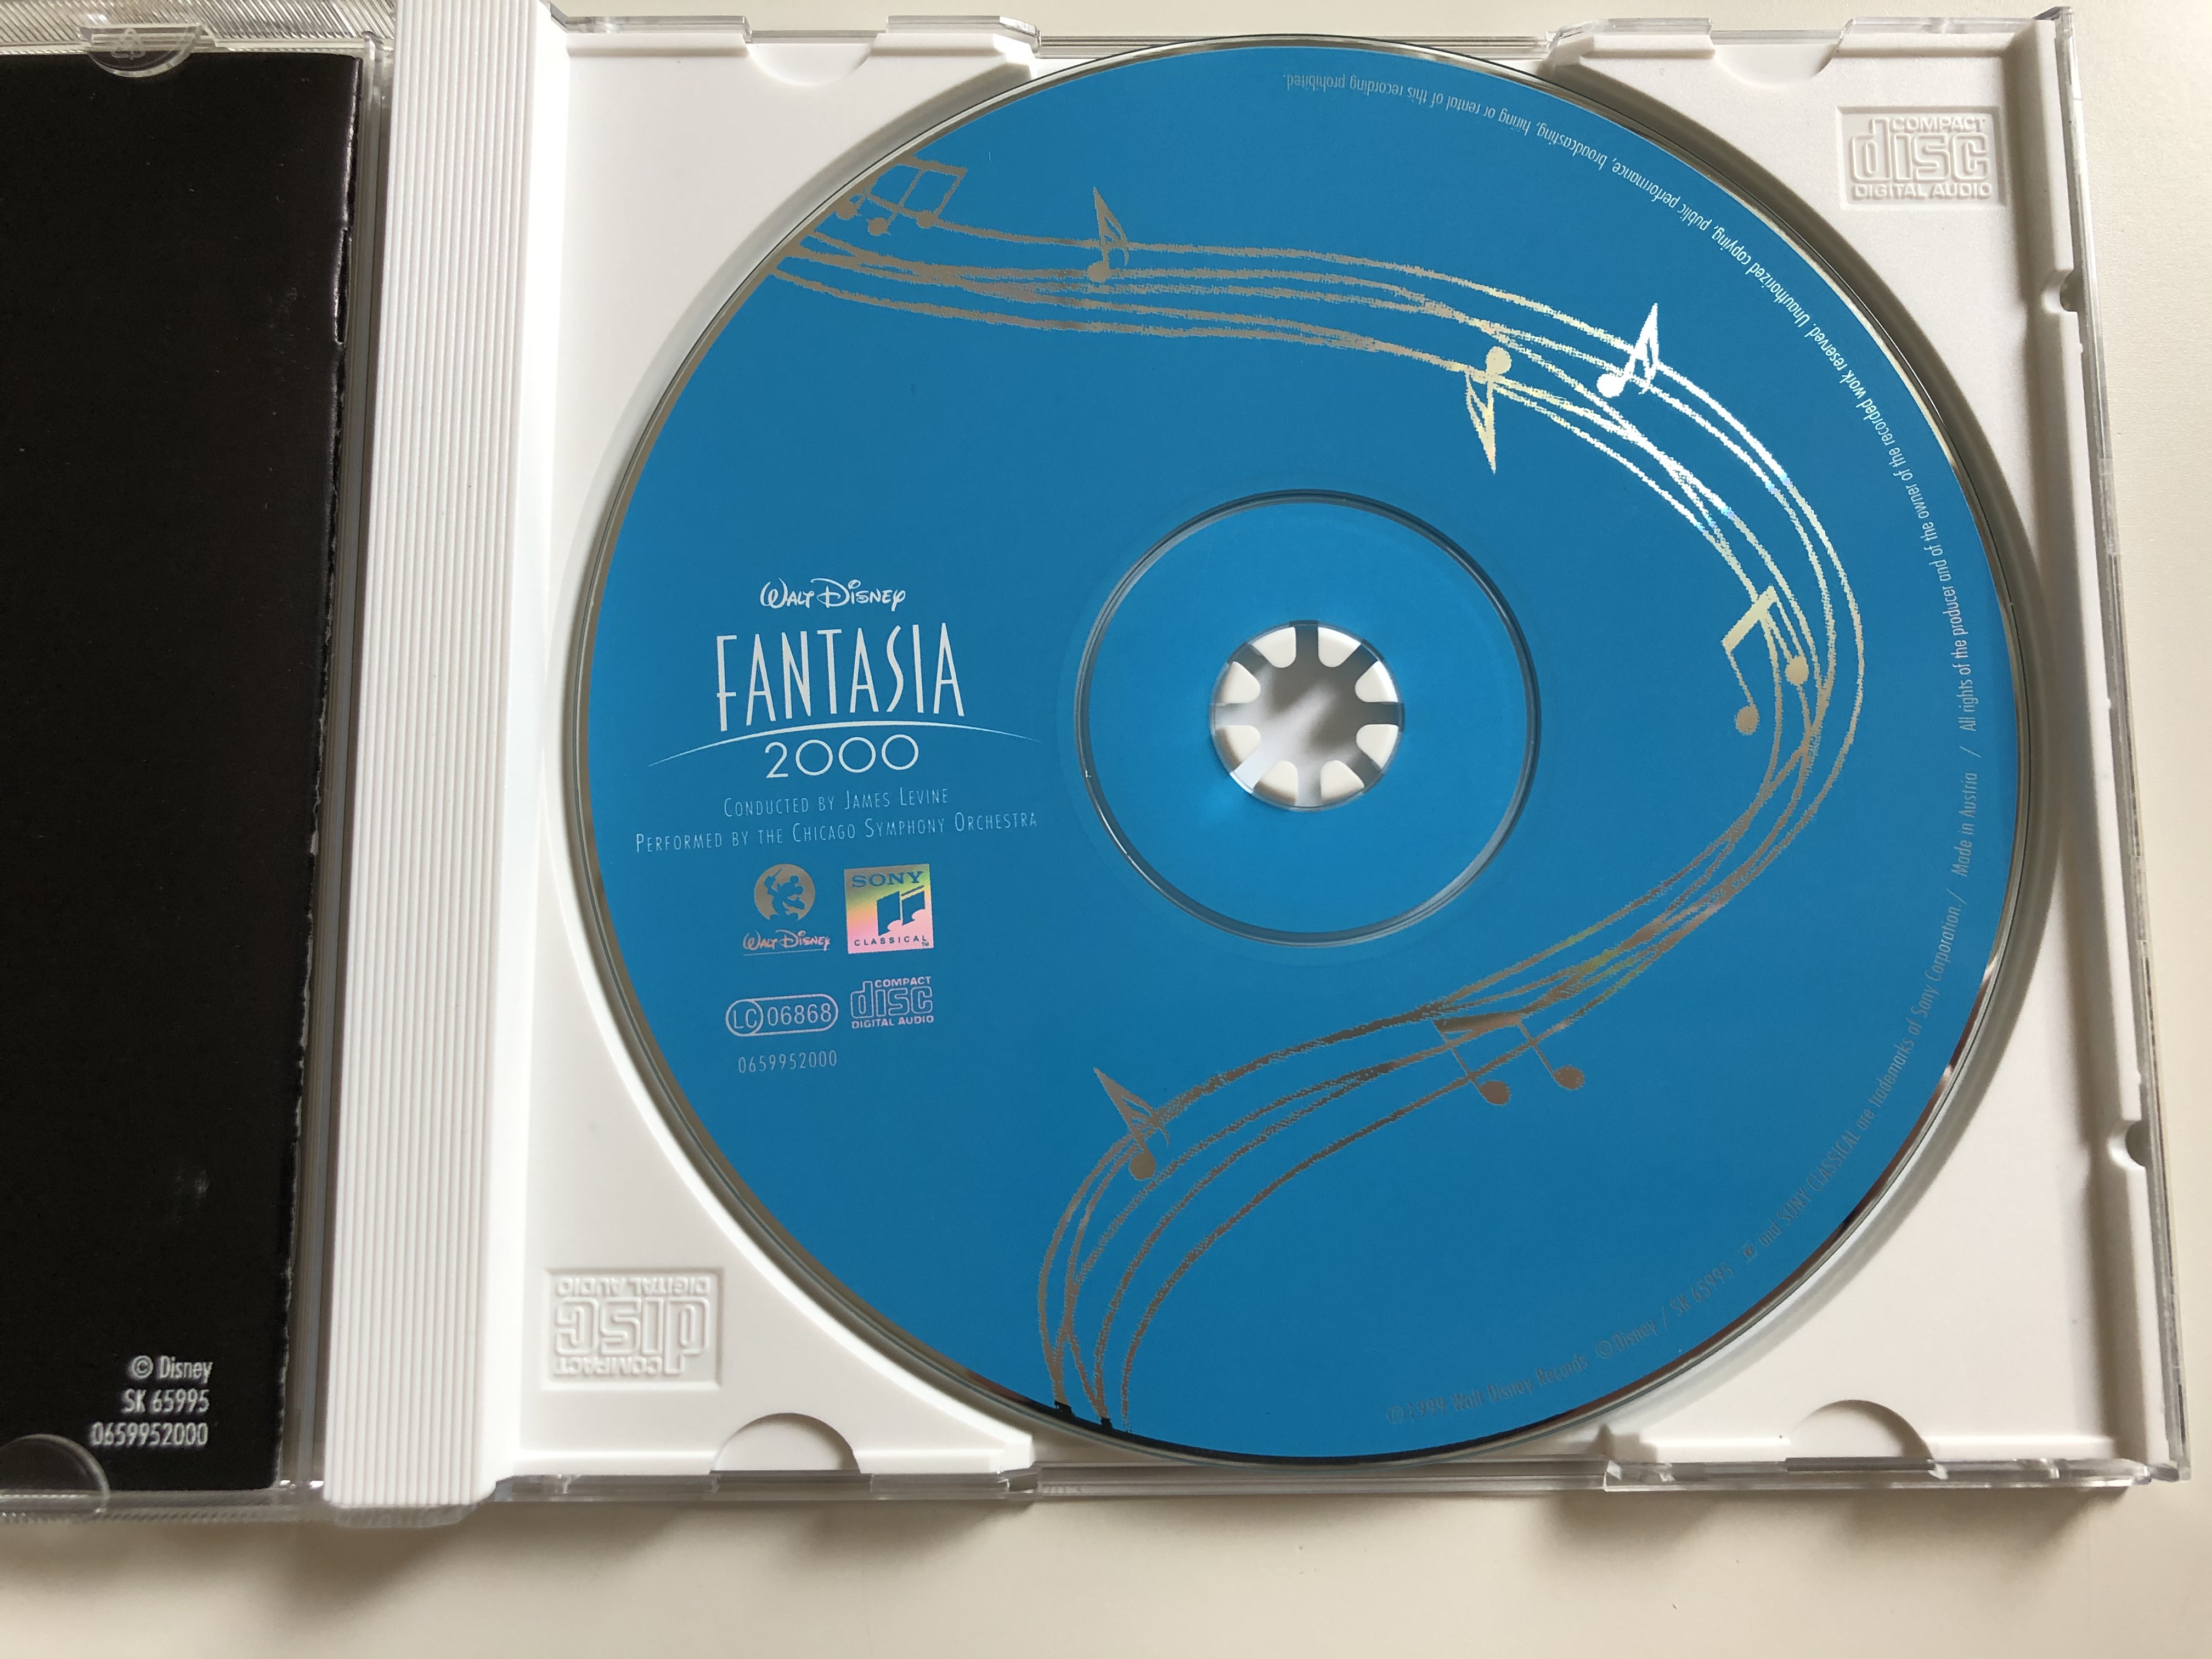 fantasia-2000-conducted-james-levine-the-chicago-symphony-orchestra-walt-disney-records-audio-cd-1999-sk-65995-10-.jpg